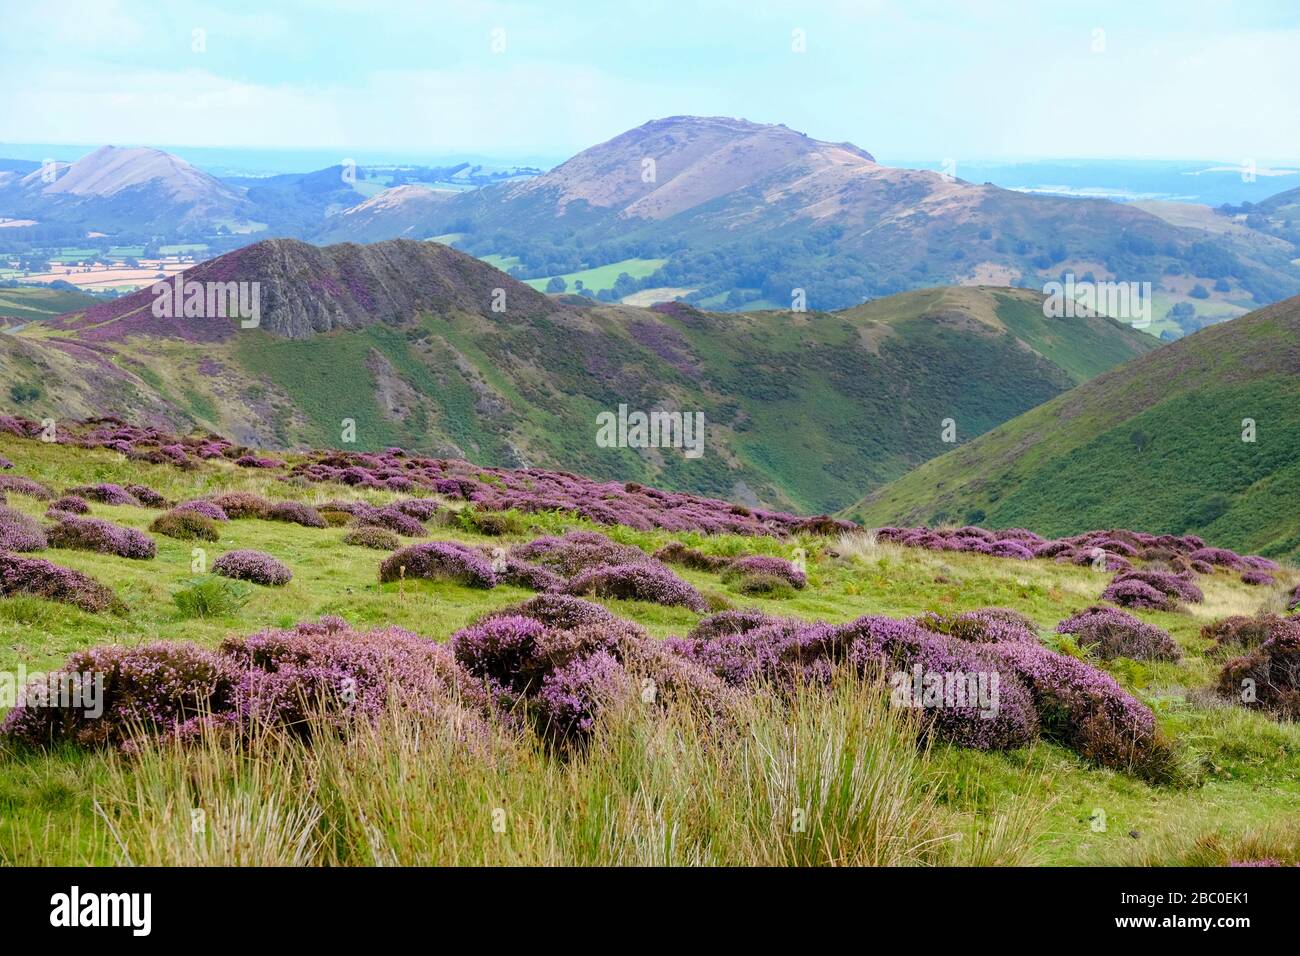 The Long Mynd range on the outskirts of the town of Church Stretton in the Shropshire Hills Area of Outstanding Natural Beauty, UK Stock Photo